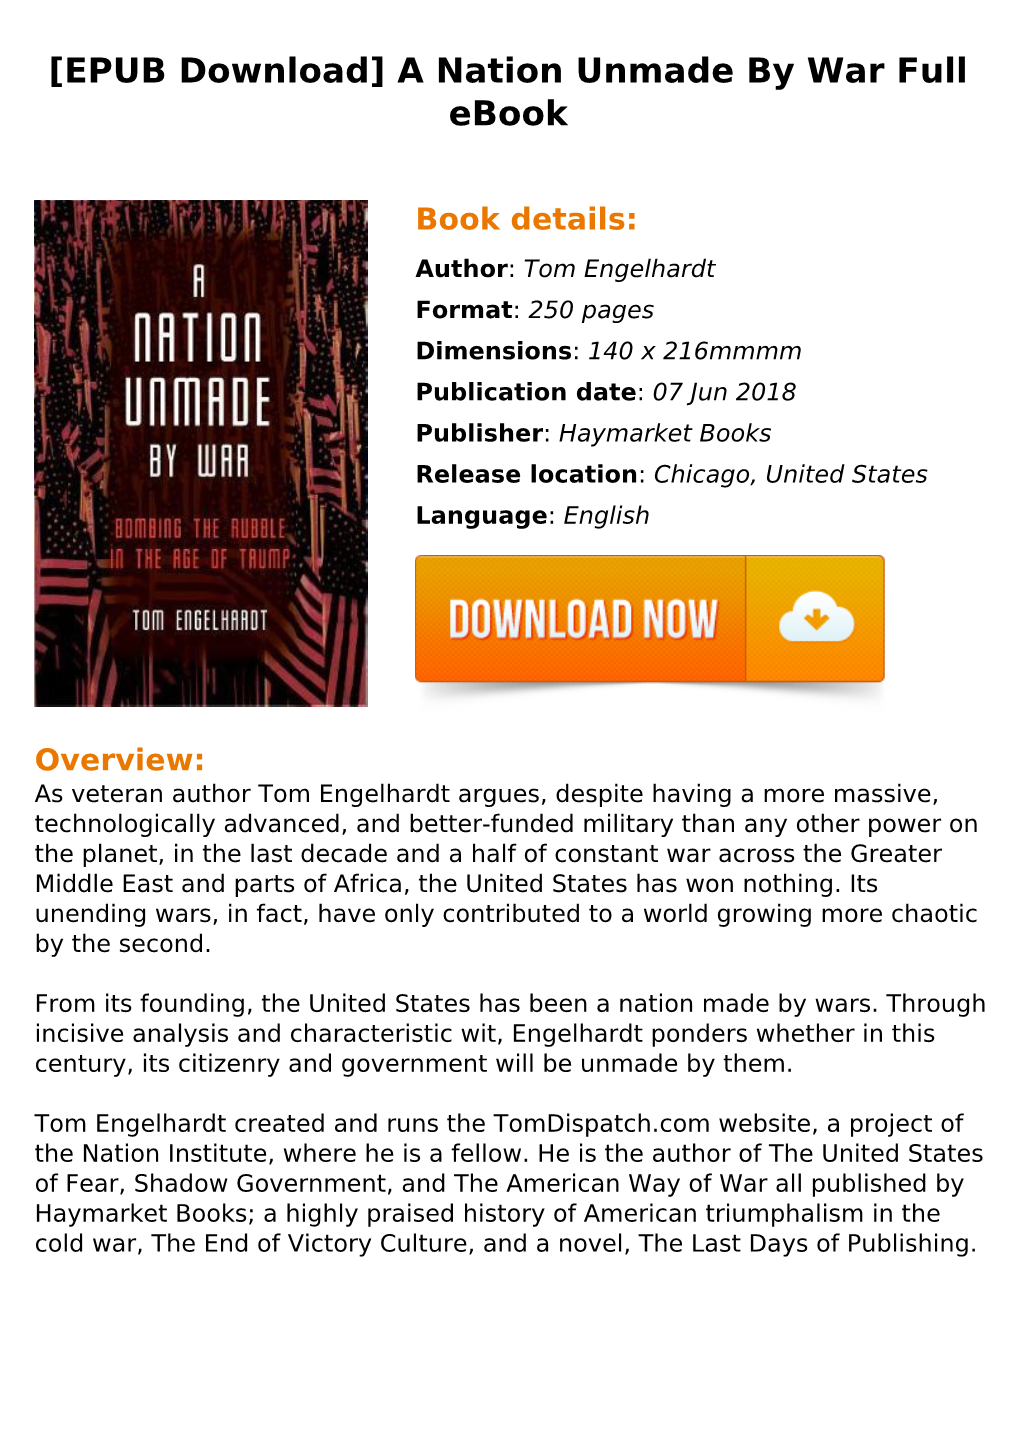 [EPUB Download] a Nation Unmade by War Full Ebook